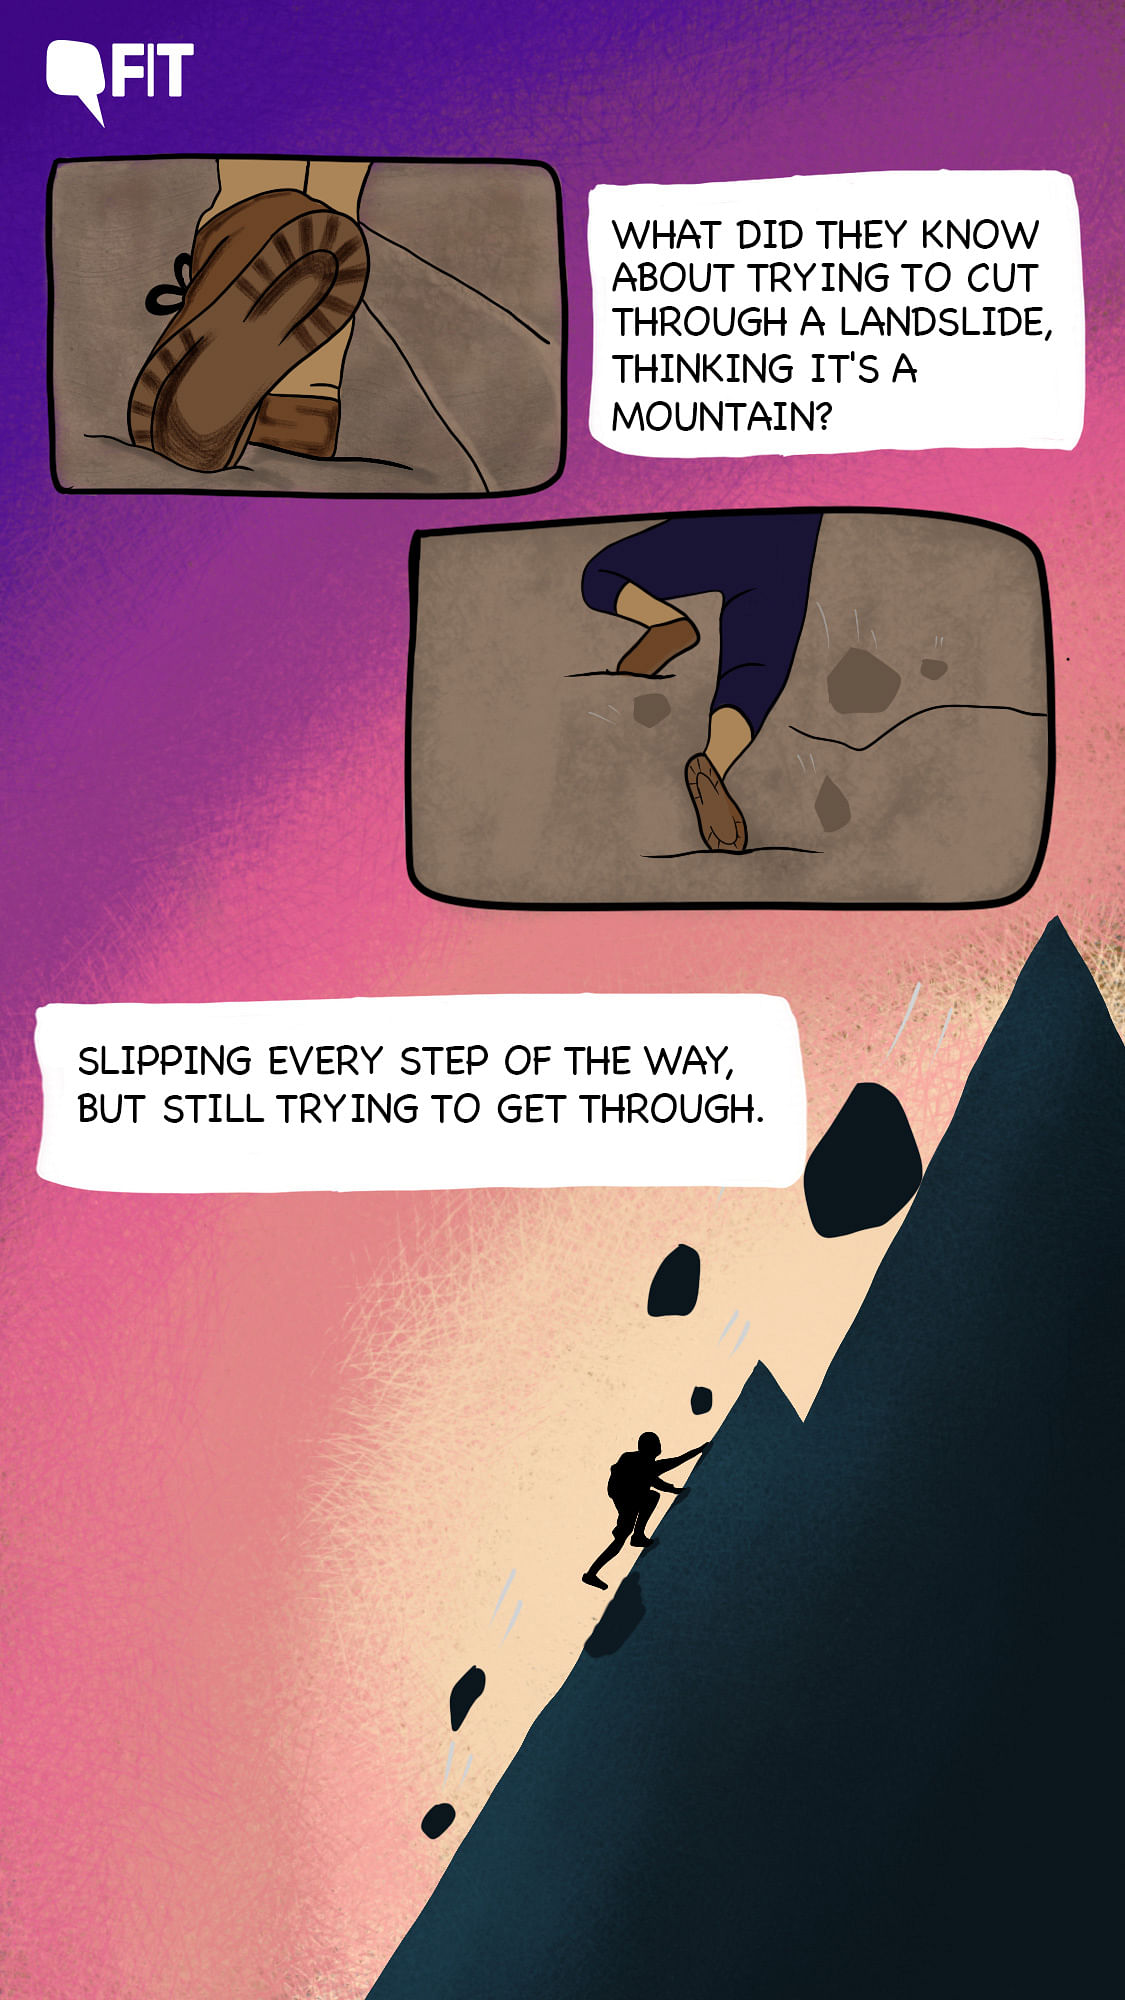 Is therapy good for you? Will it help resolve your issues? This comic does not answer that. 